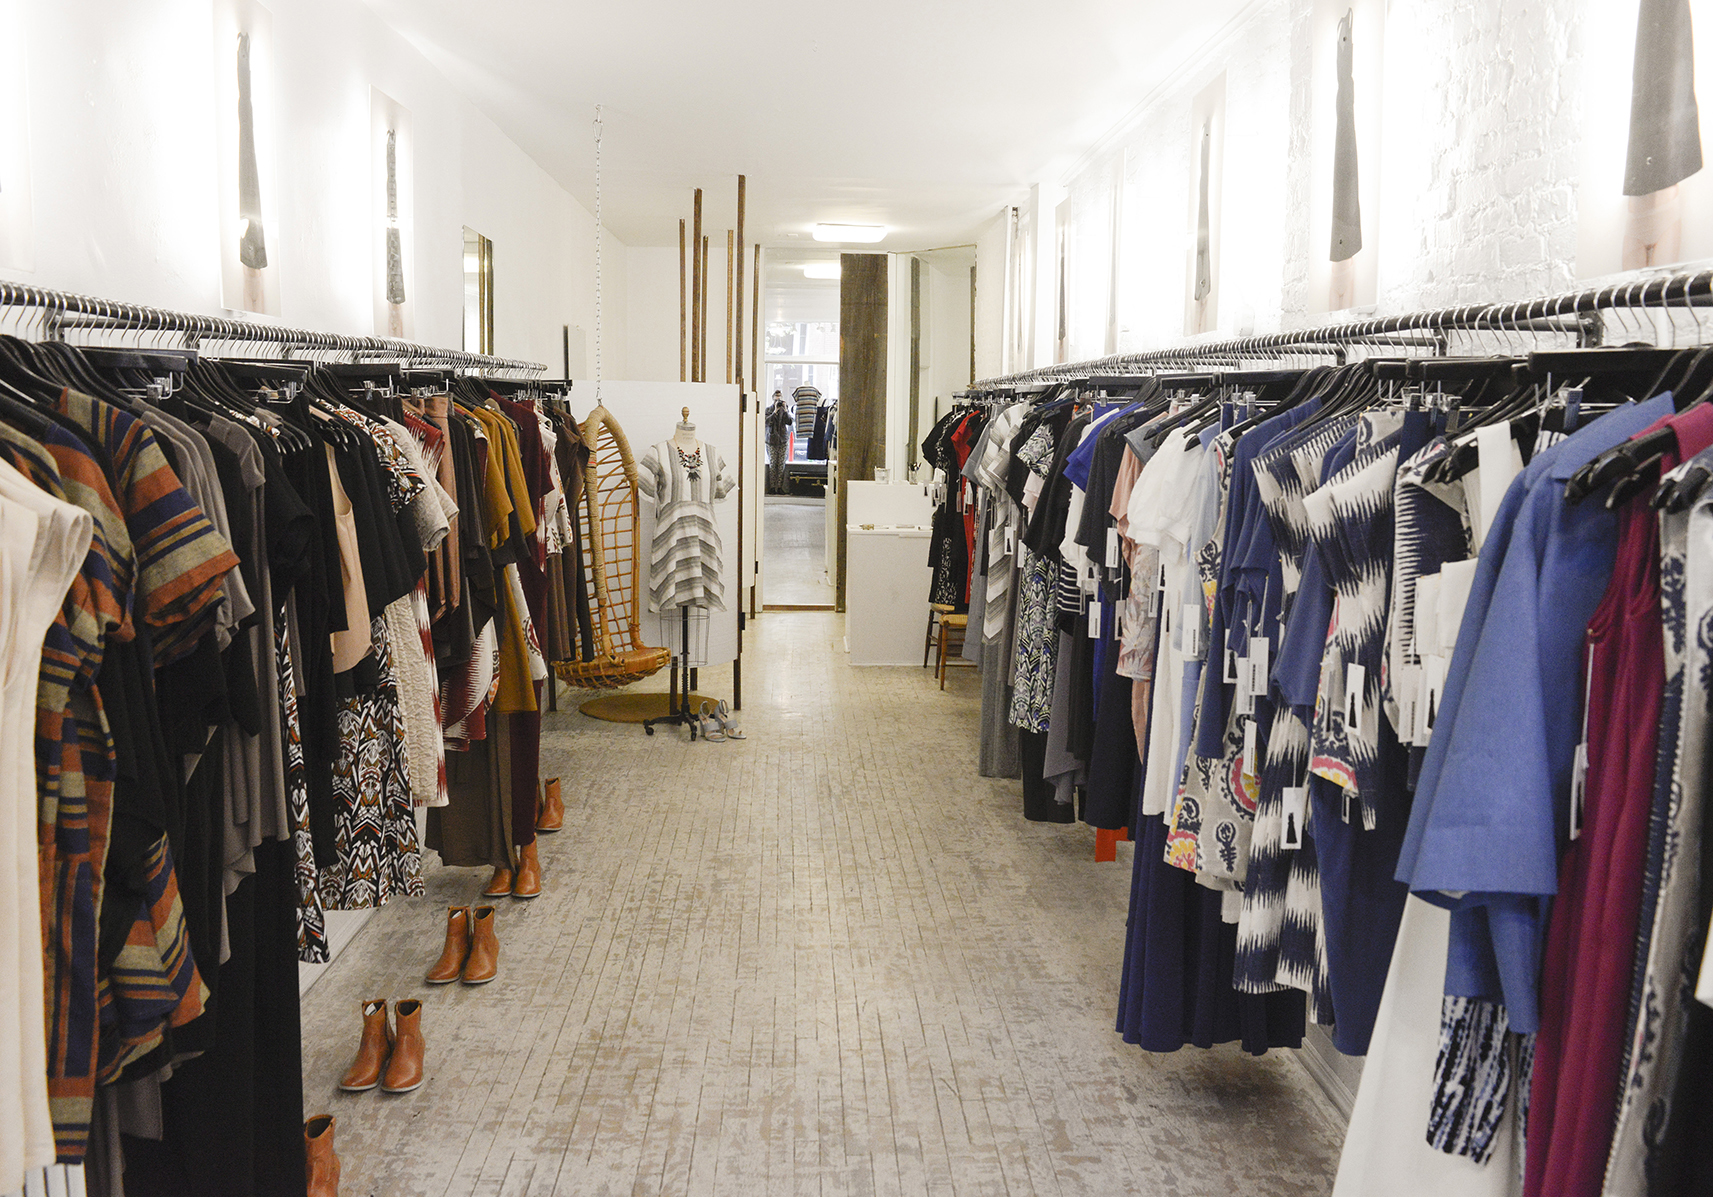 Best clothing boutiques in NYC for accessories and new outfits